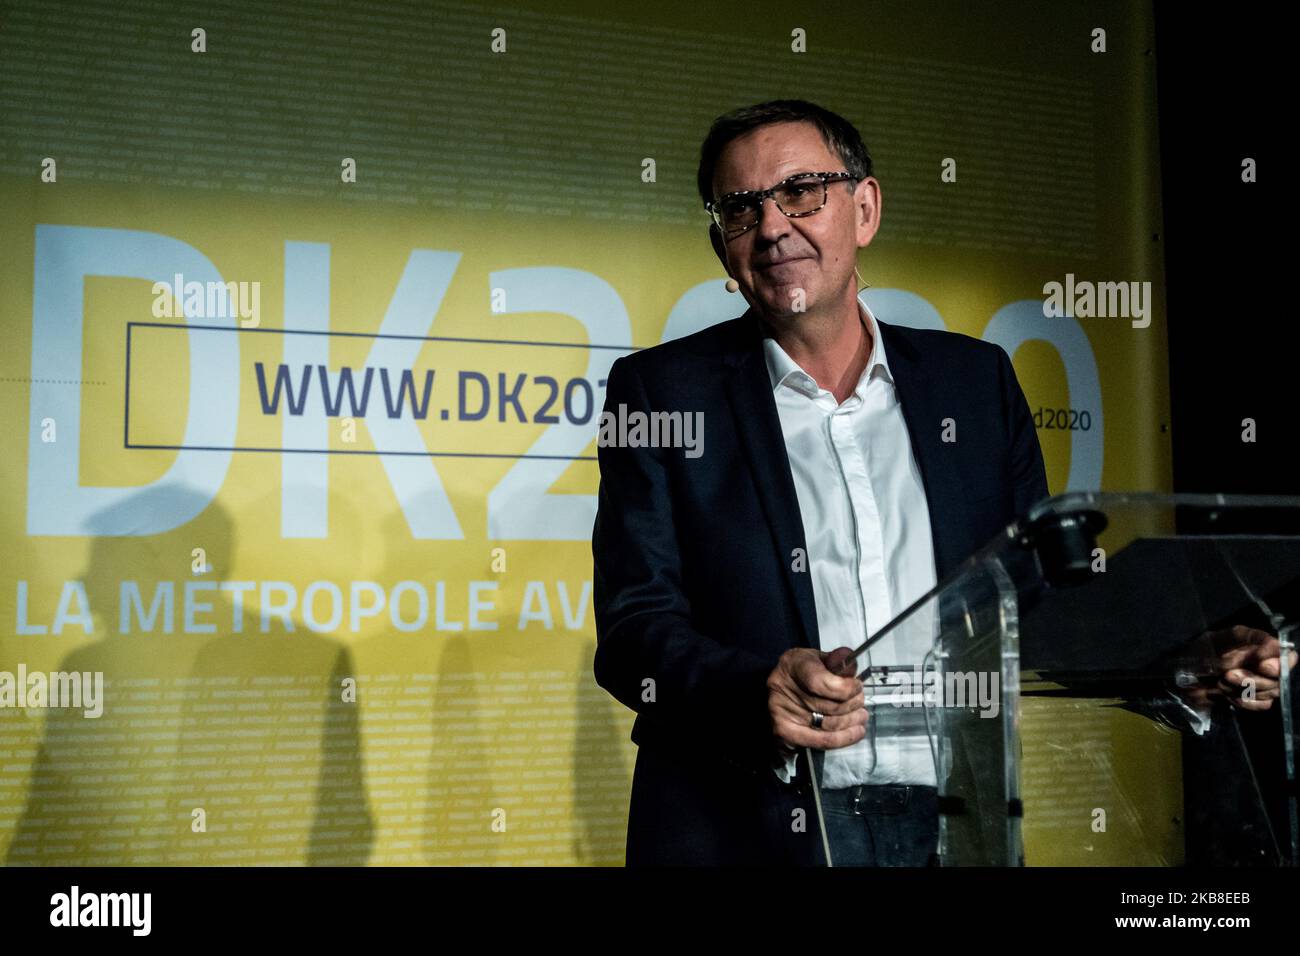 President of Lyon Metropol and candidate for the upcoming municipal and metropolitan elections in Lyon David Kimelfeld delivers a speech during a meeting on 16 October, 2019 in Lyon. (Photo by Nicolas Liponne/NurPhoto) Stock Photo